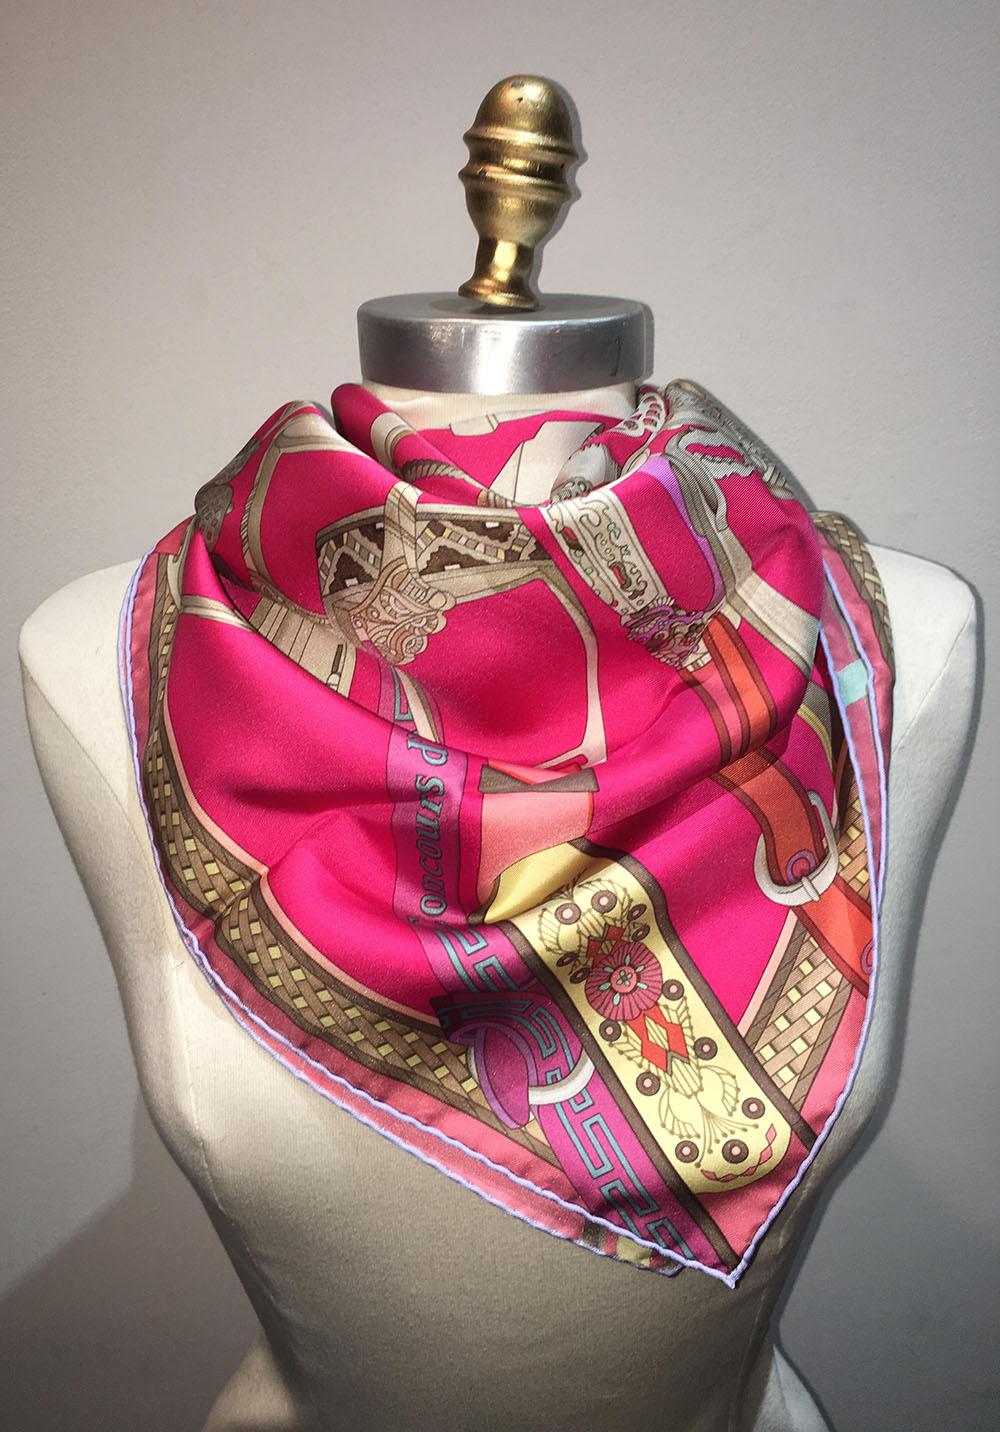 GORGEOUS RARE Hermes Concours d'Etriers Silk Scarf in Pink in excellent condition. Original silk screen design by Virginie Jamin c2011 features various horse footings and shoes in greys and pewters with multi colored leather strap holders over a